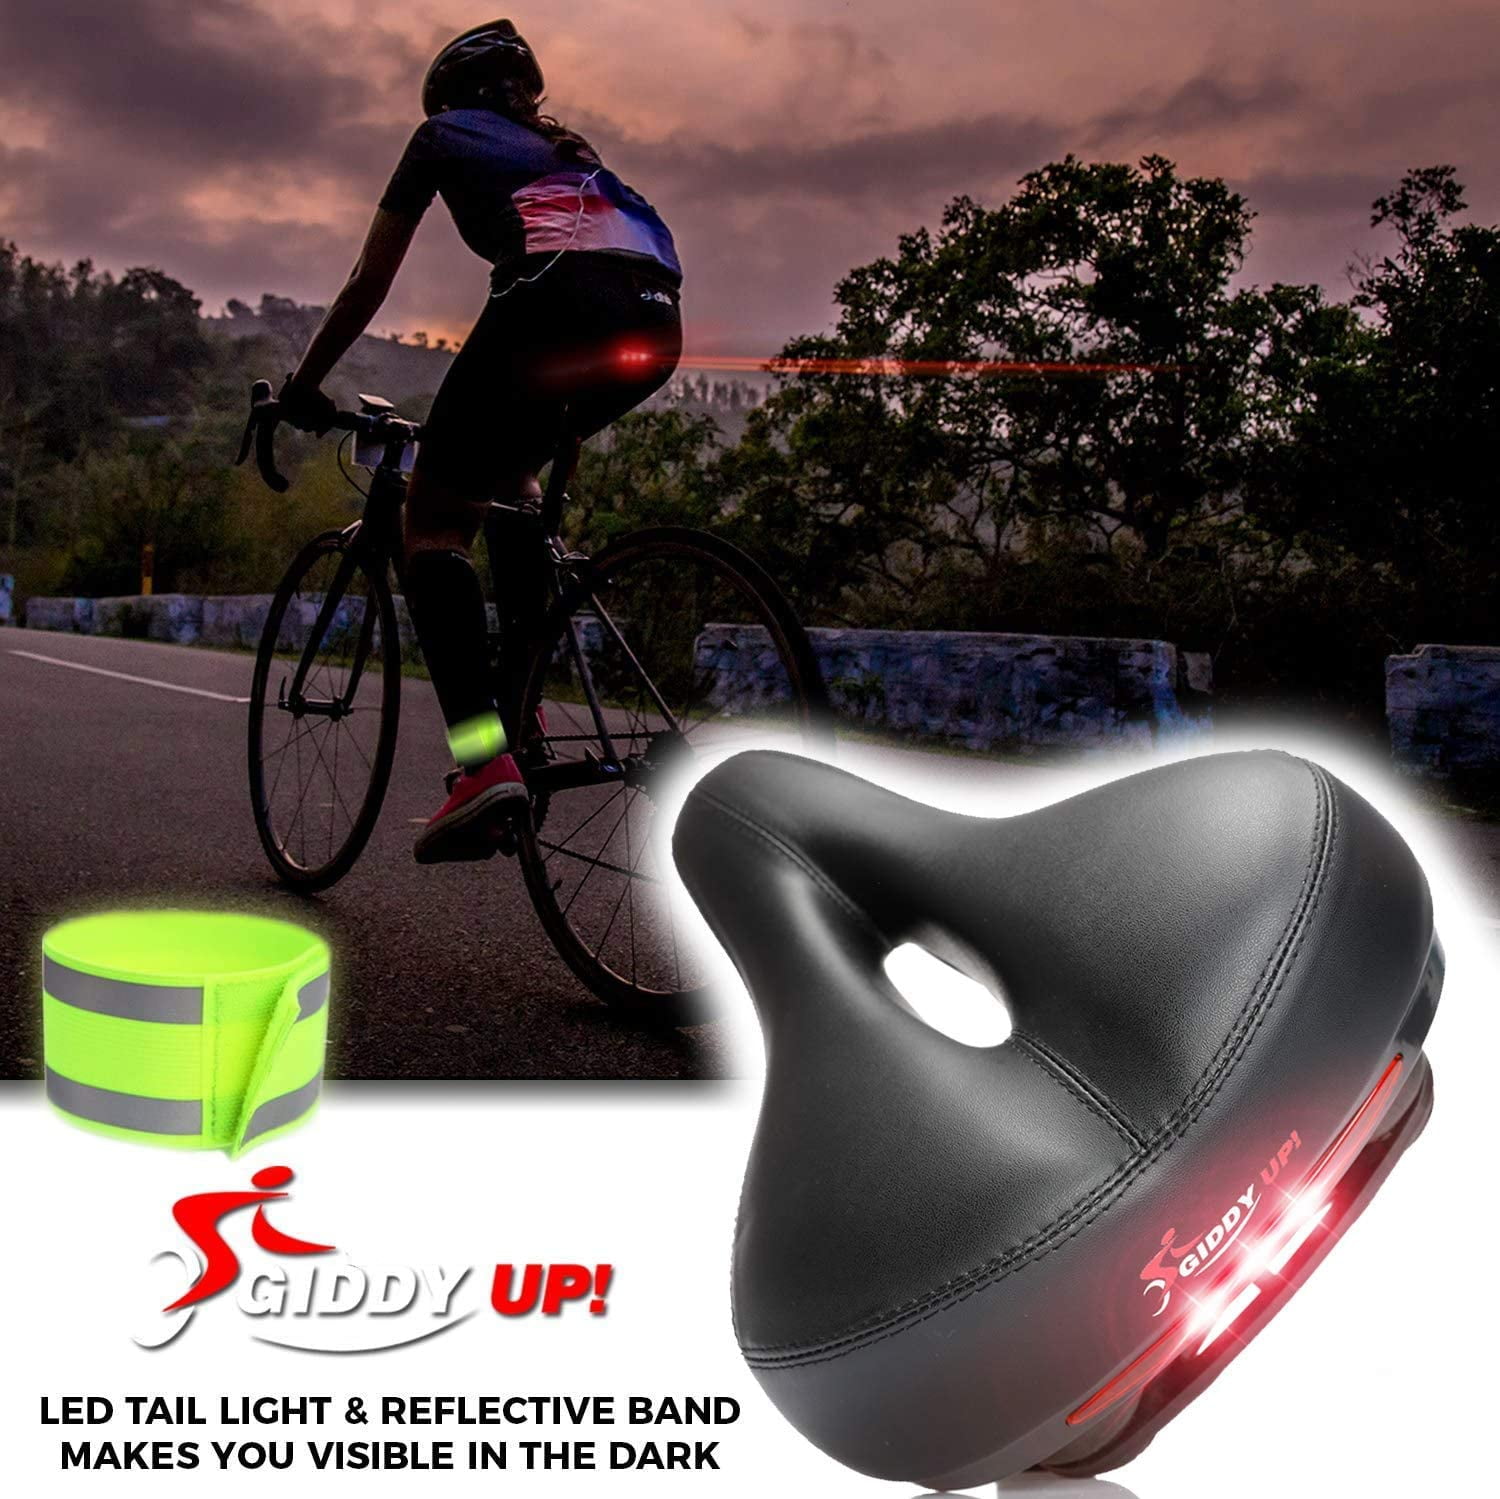 Giddy up Bike Seat Most Comfortable Memory Foam Waterproof Saddle Universal Fit for sale online